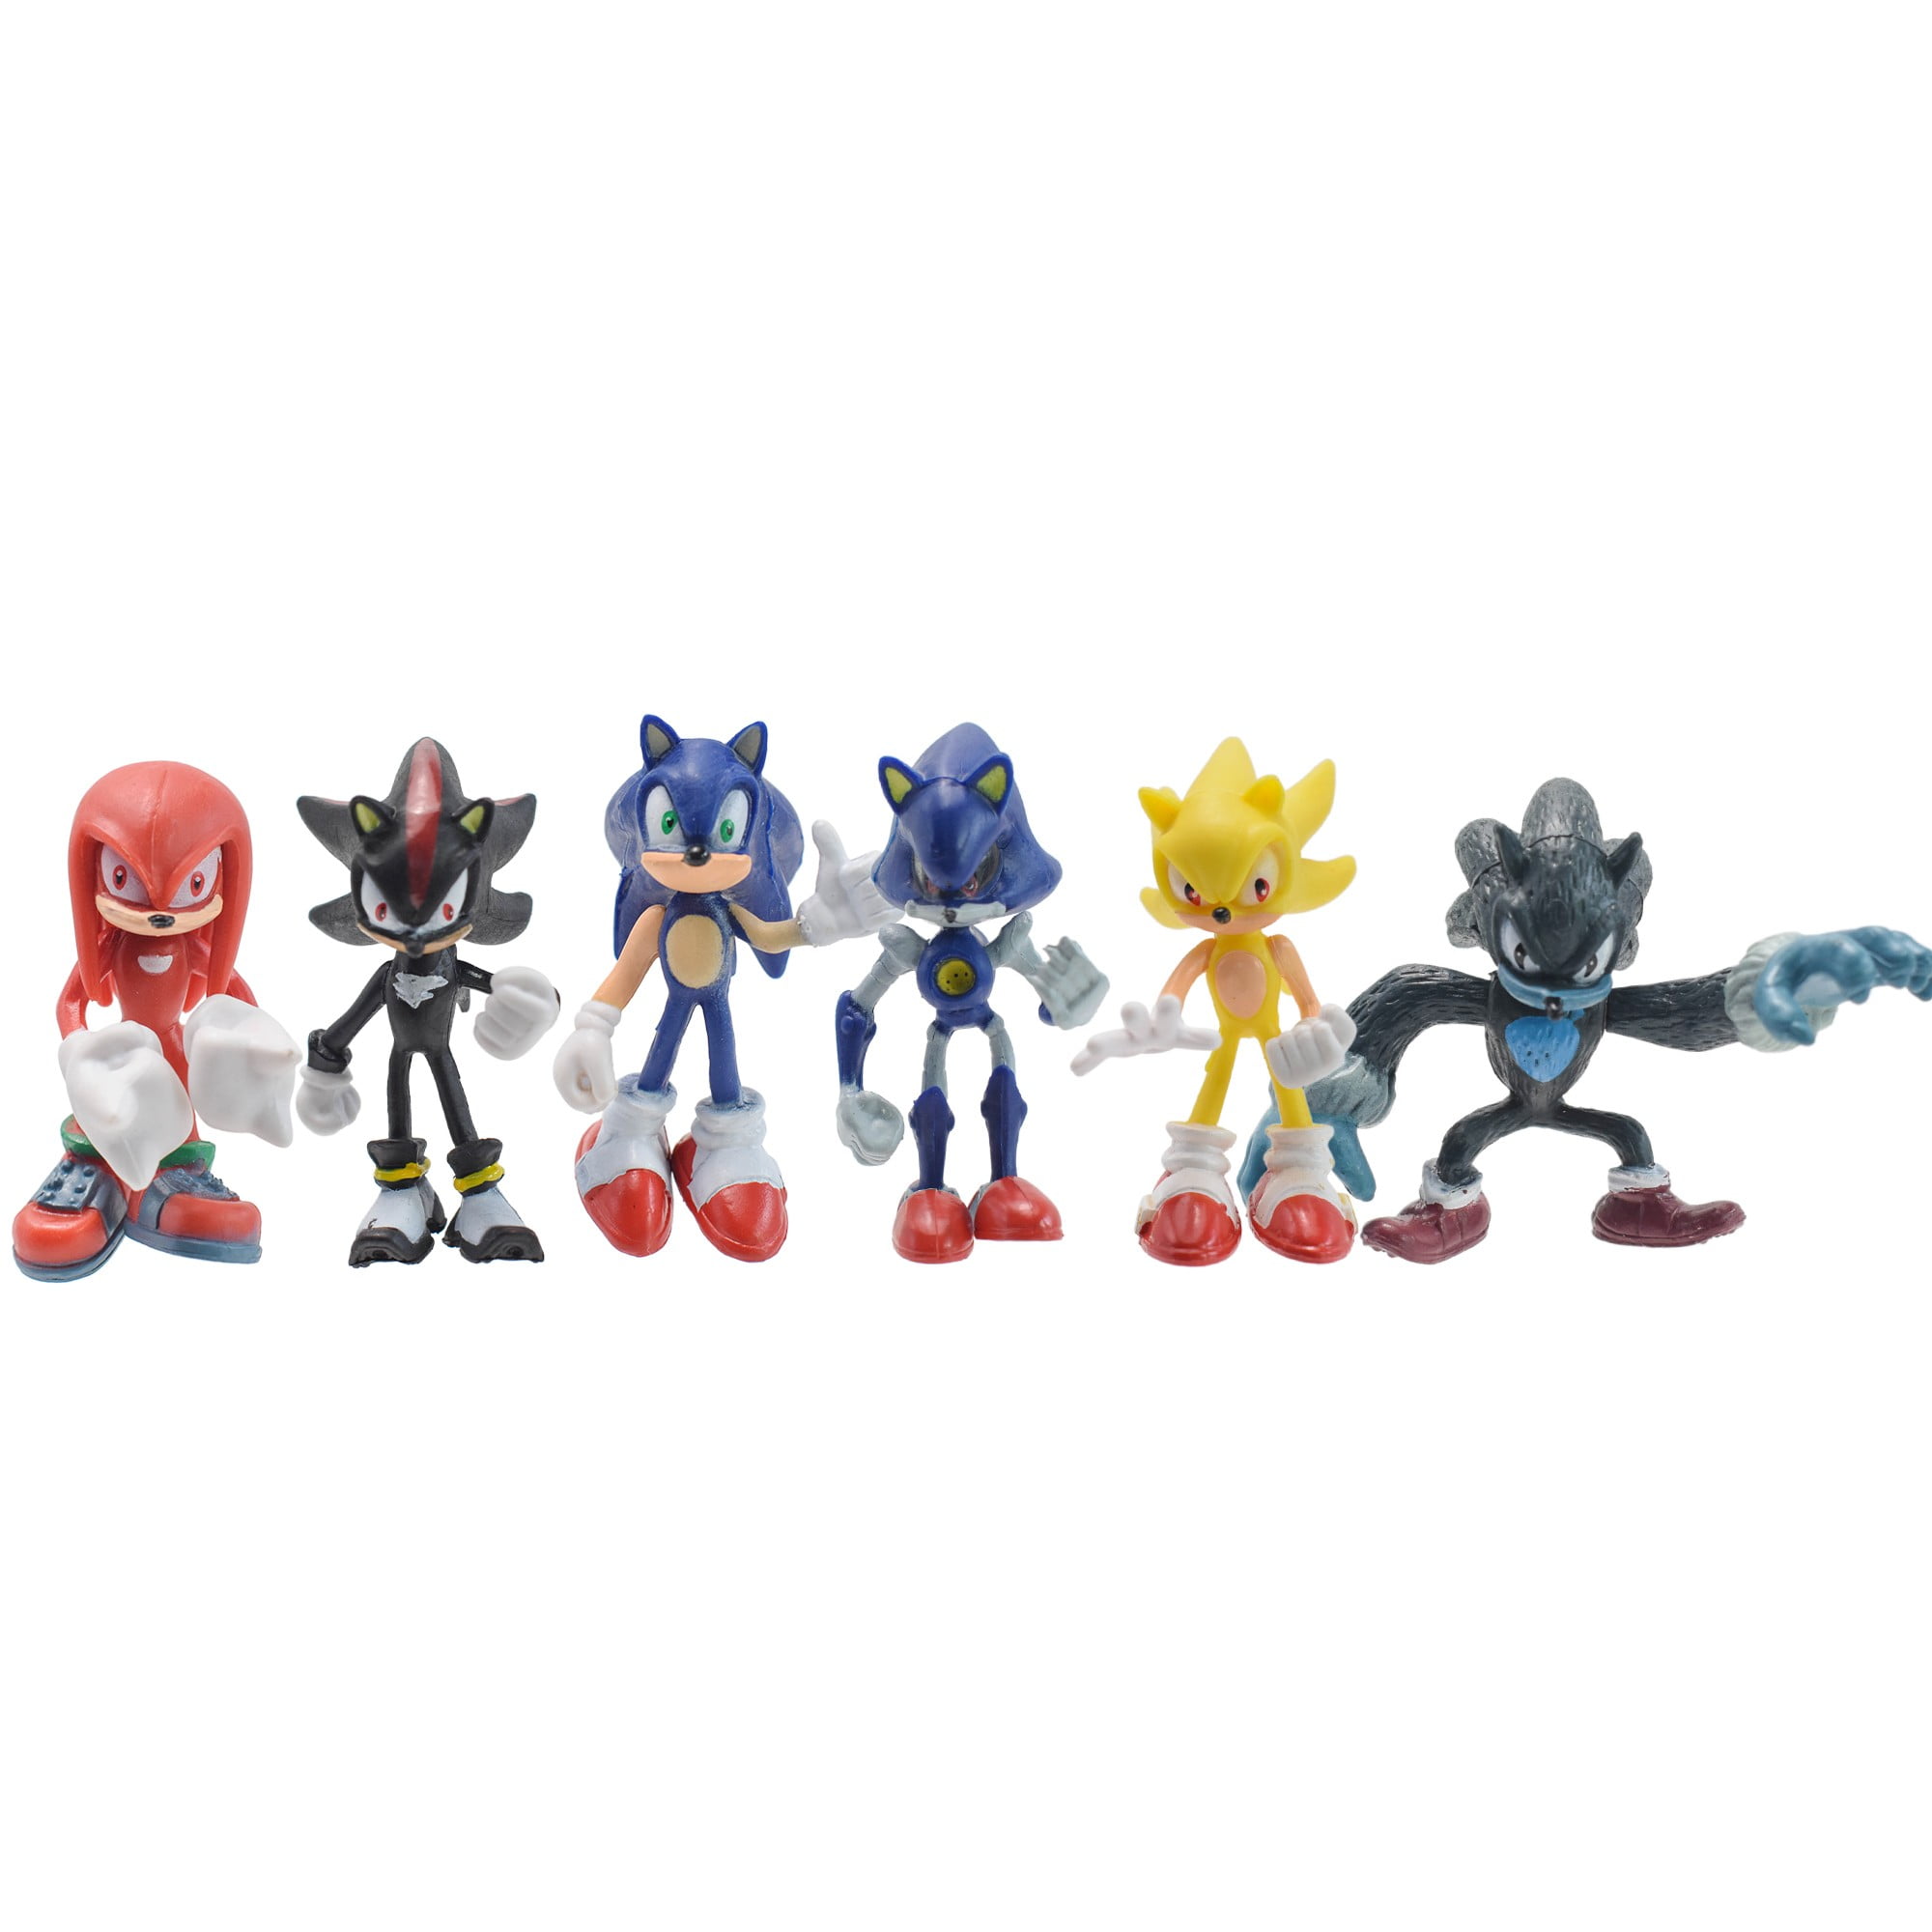 Sonic The Hedgehog 6 pcs Action Figure Toy Set of Toy Cake Topper in Box 